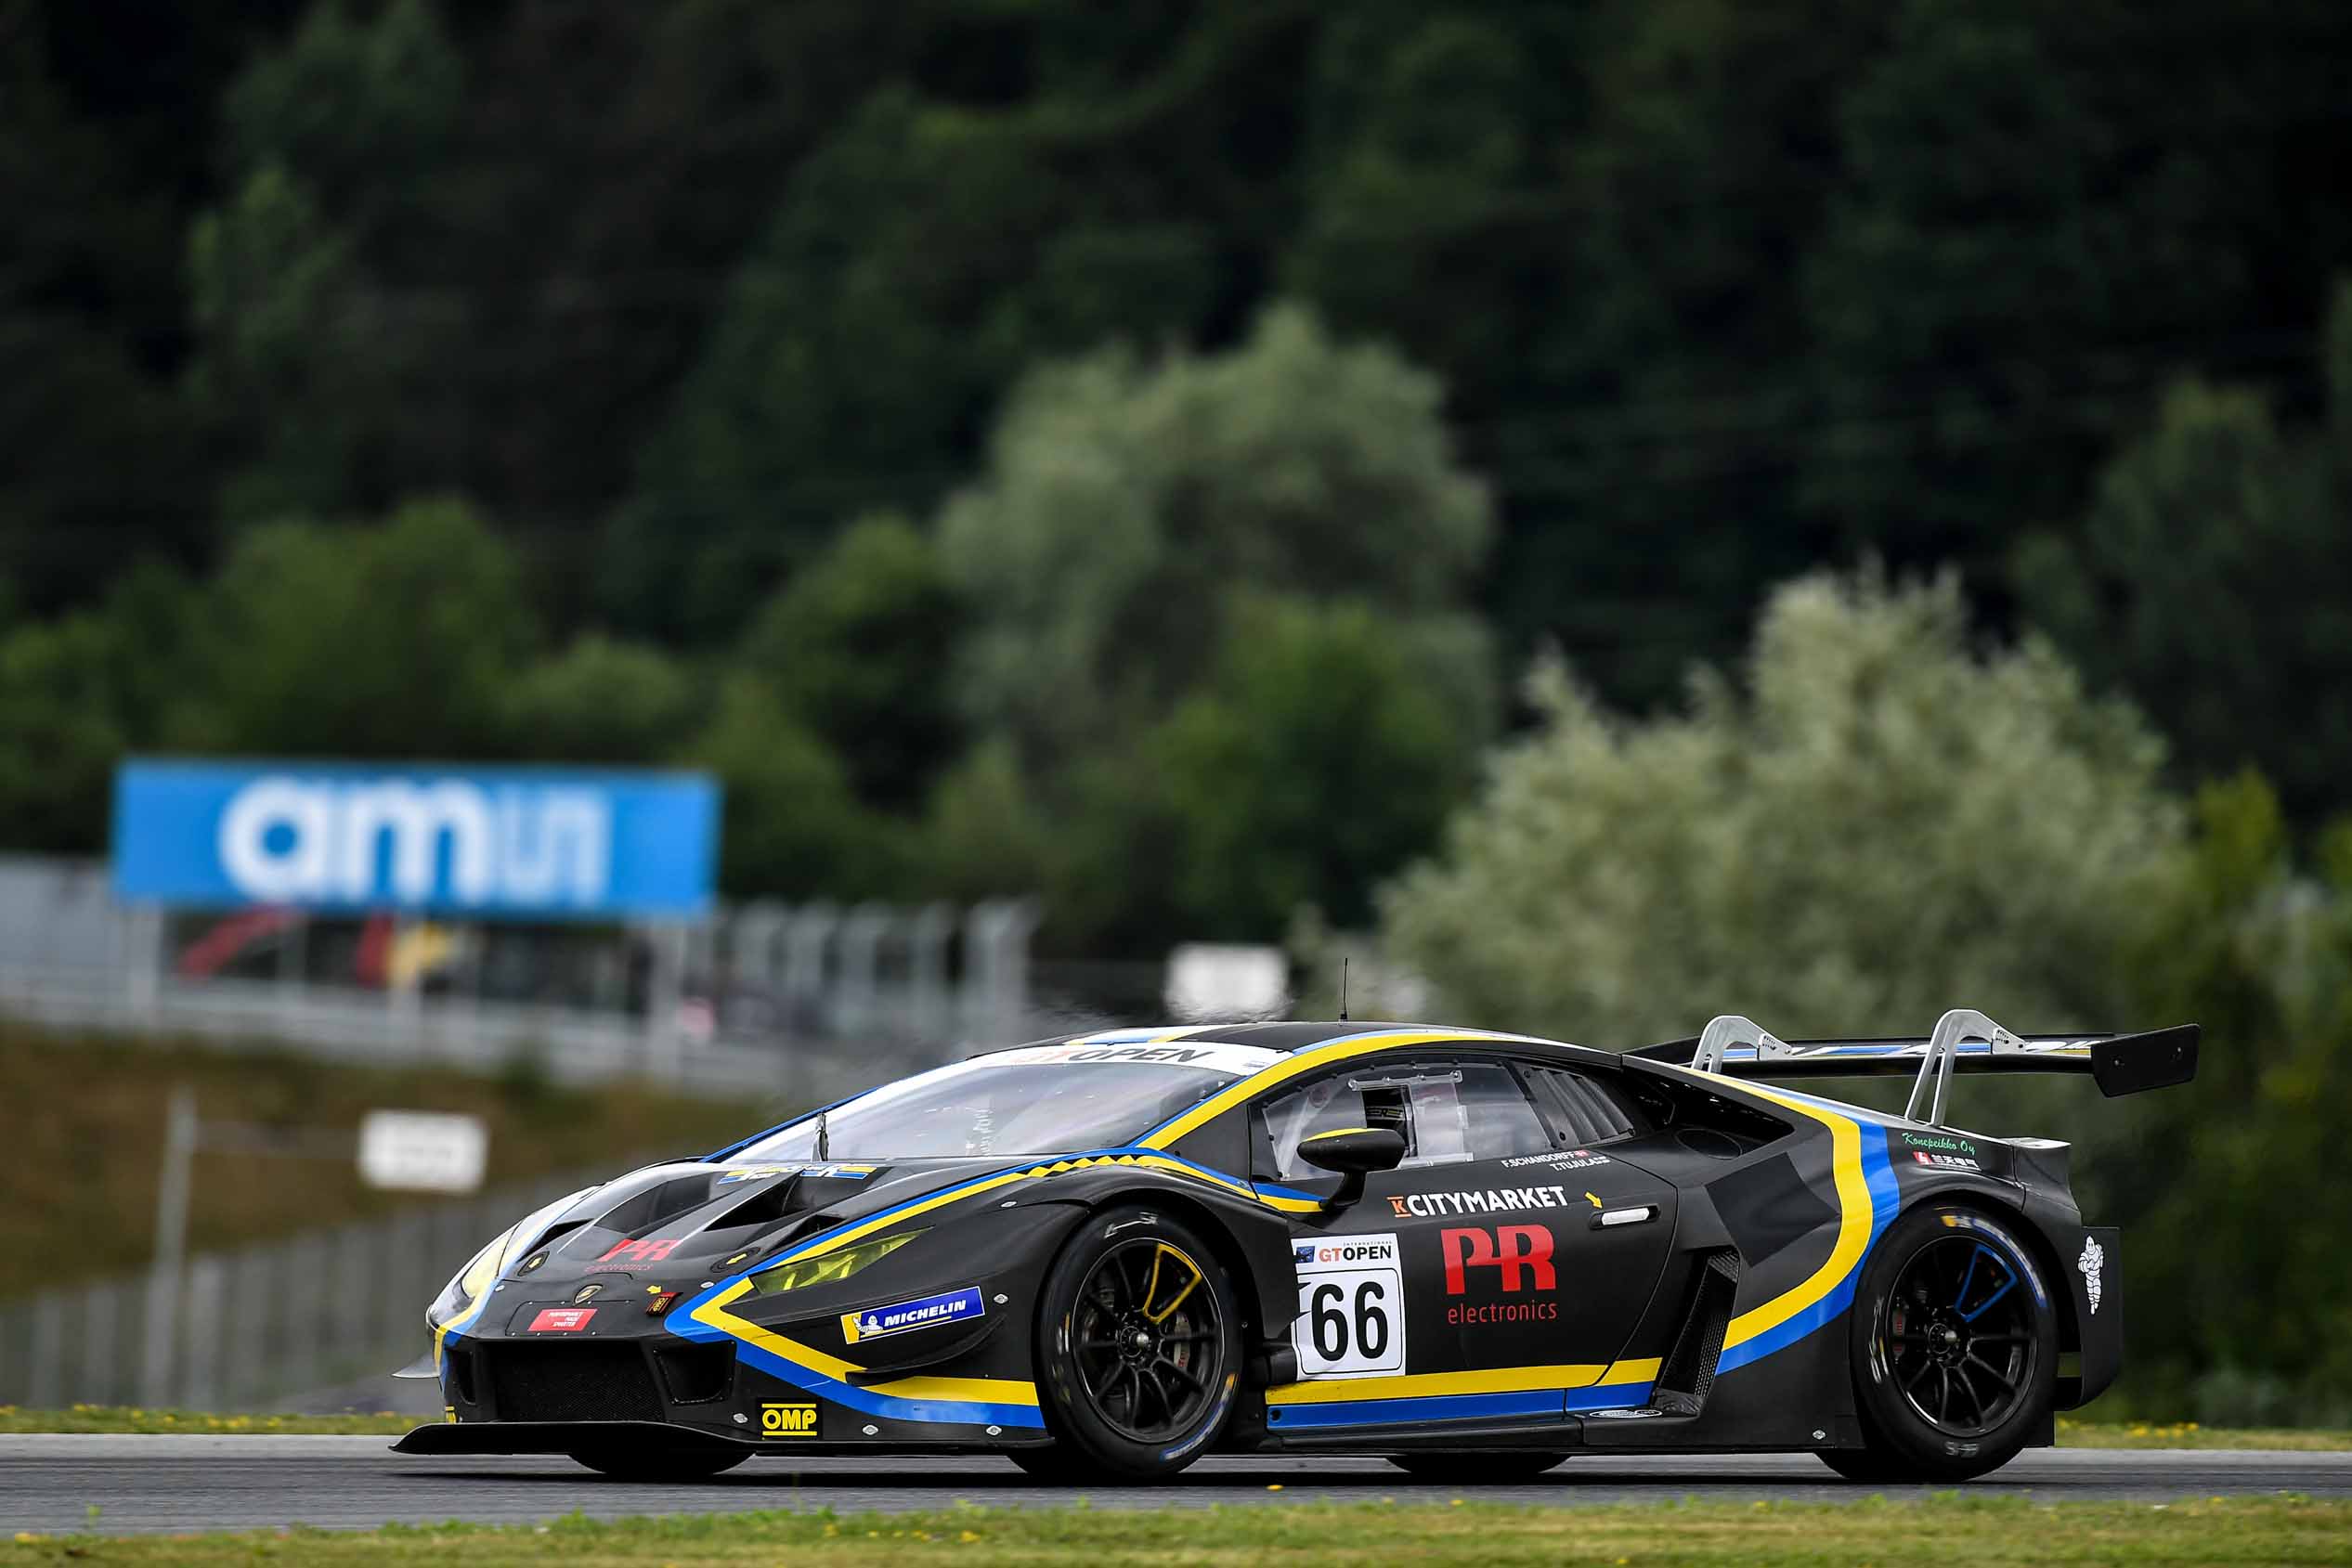 SCHANDORFF AND TUJULA VICTORIOUS AT THE RED BULL RING